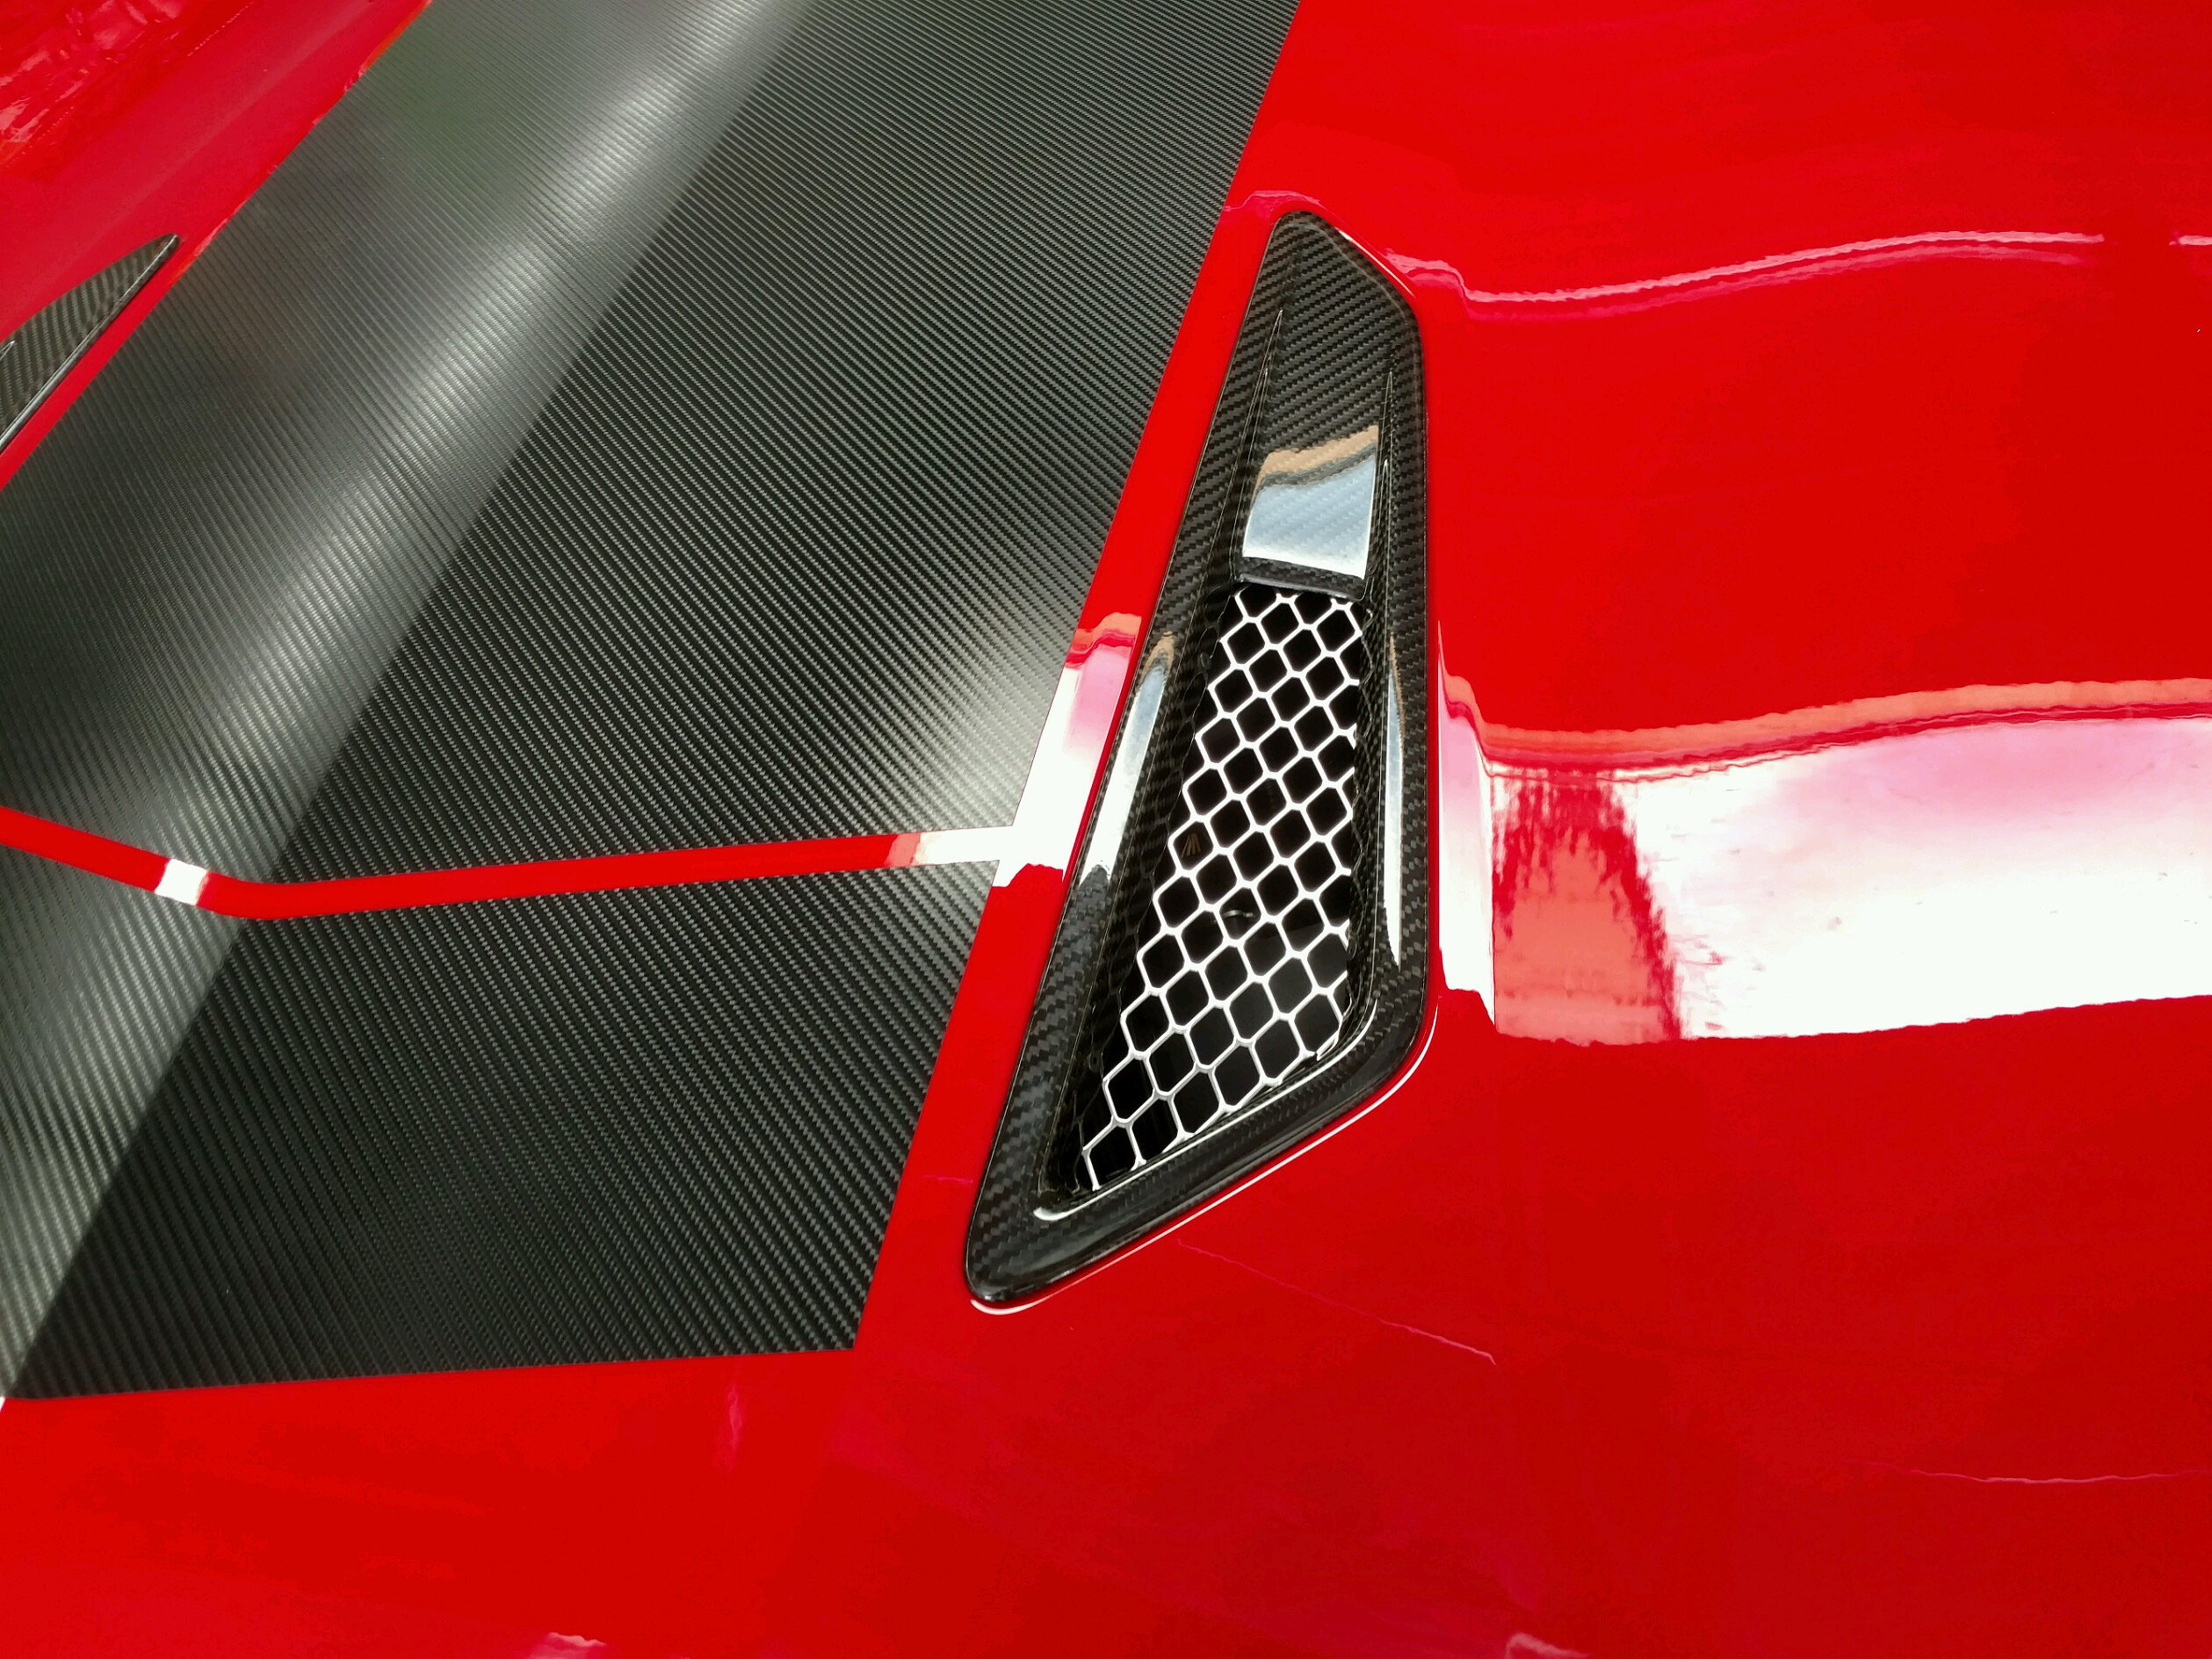 2016 - 2018 Chevy Camaro Real Carbon Fiber Heat Extractor Hood Vent Trim, 3 times larger